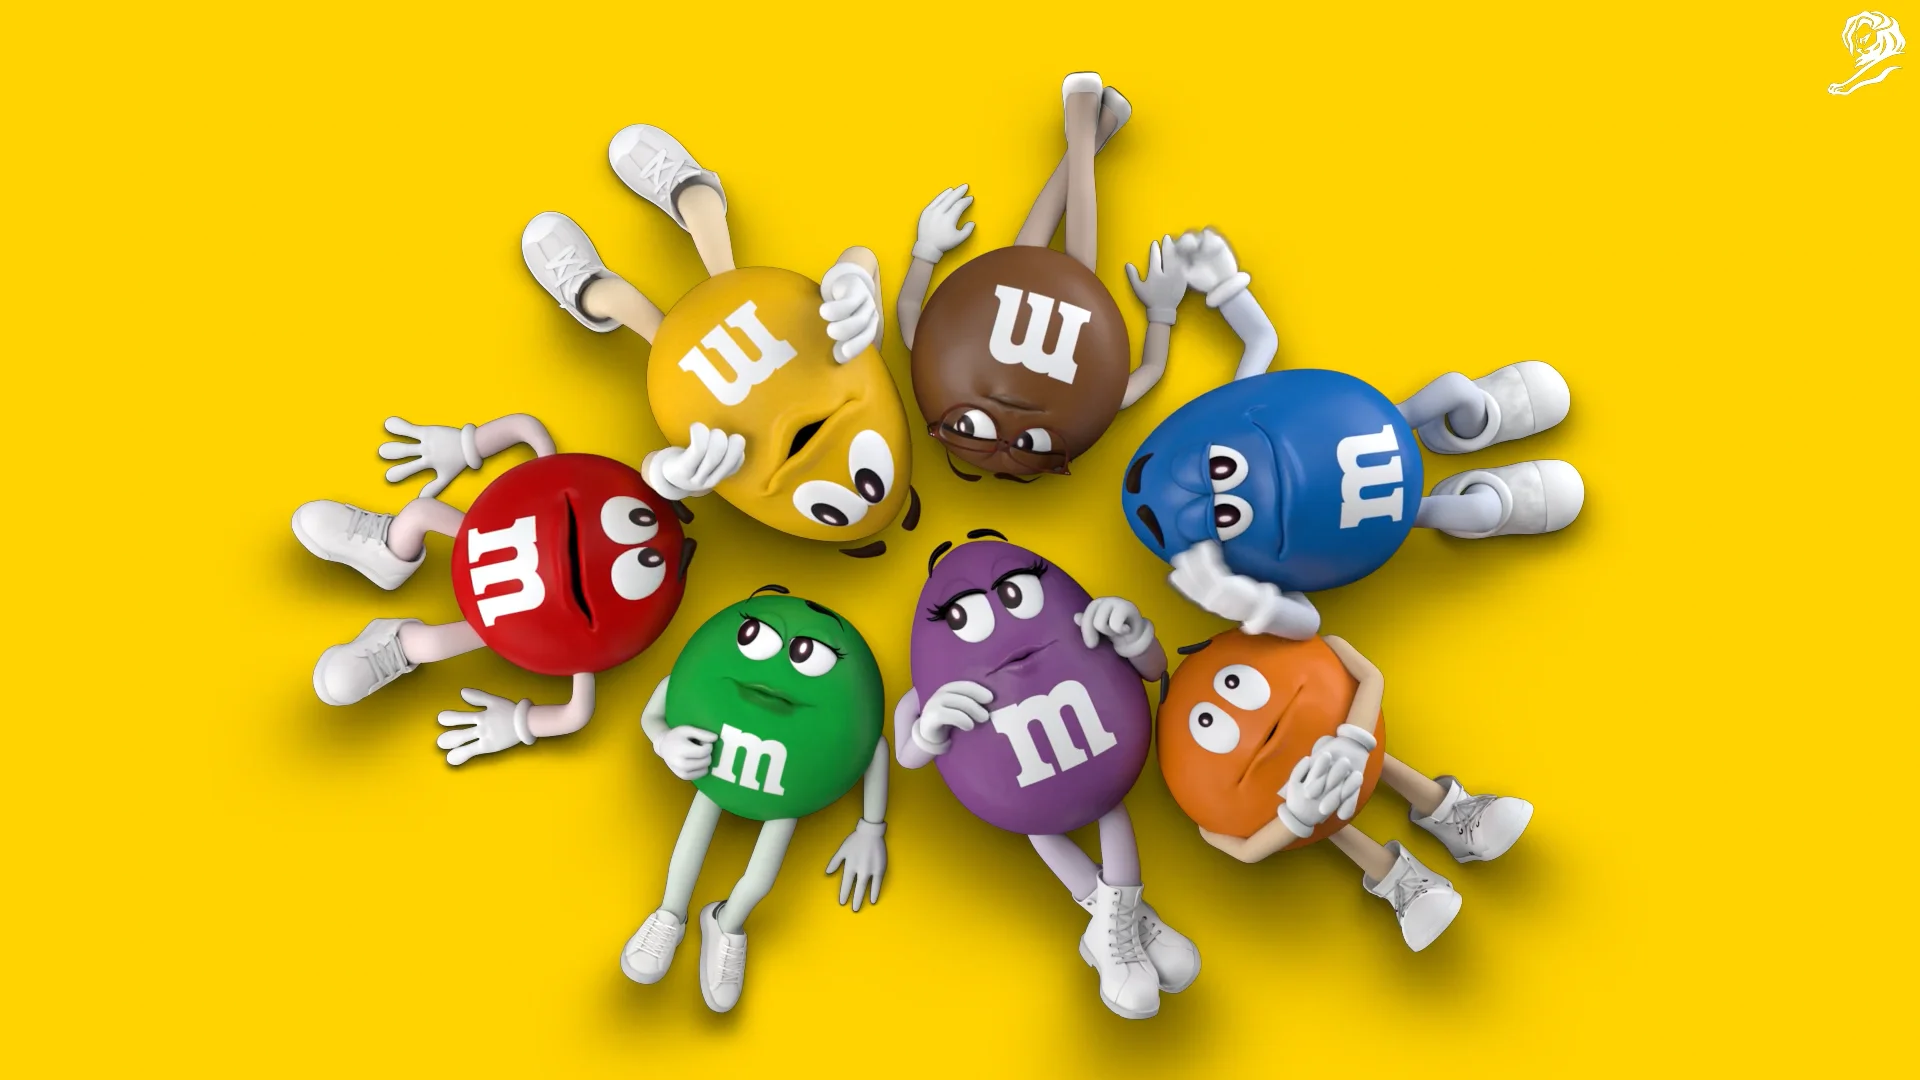 M&M's Characters Are Back for Good in Epic Super Bowl Campaign